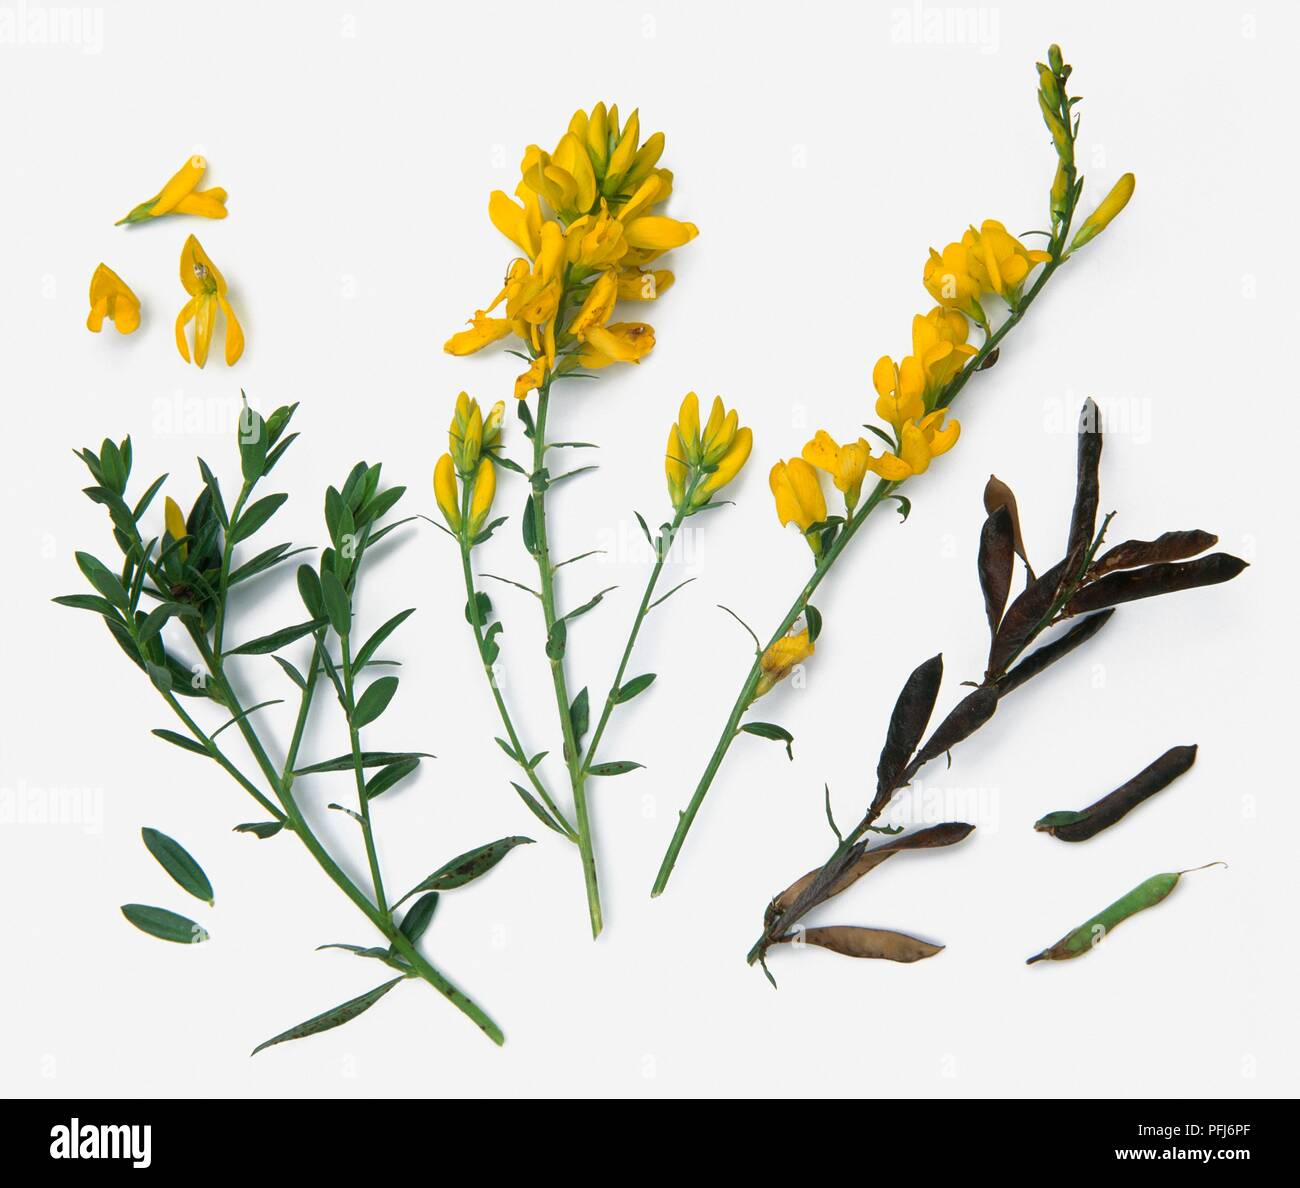 Genista tinctoria (Dyer's Greenweed), with yellow flowers, green leaves on stems, and seed pods Stock Photo